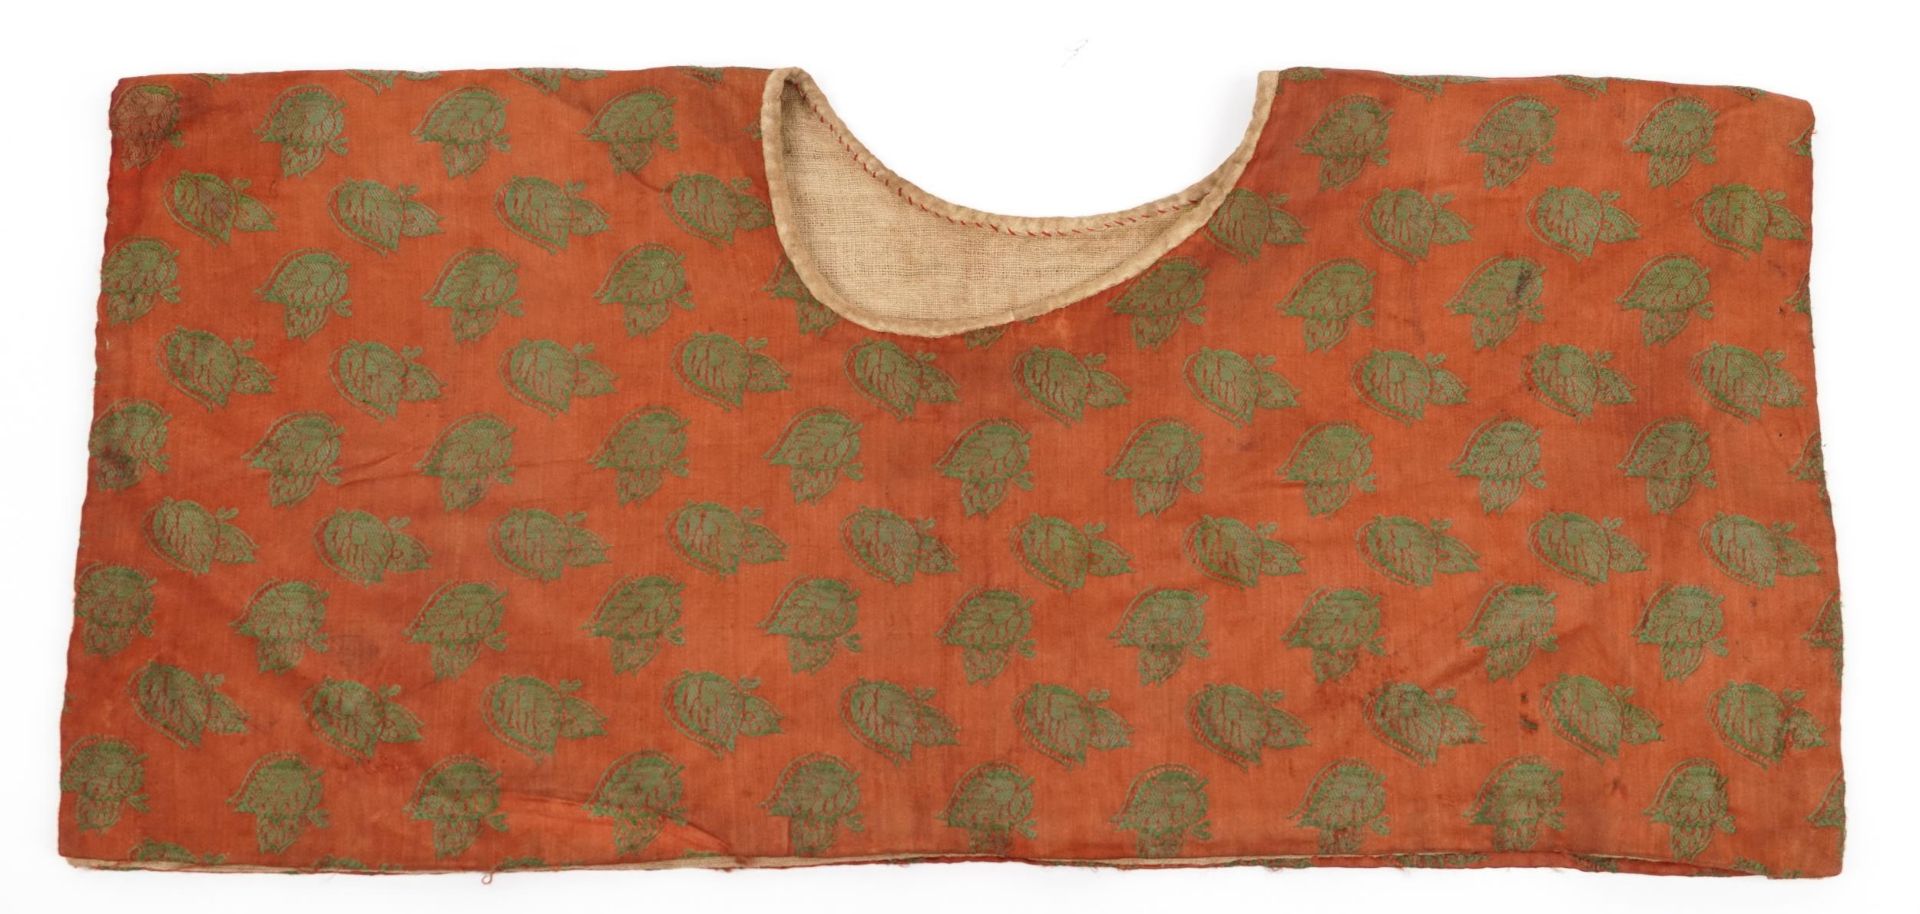 Early 18th century Turkish Ottoman barber's apron, 63cm x 60cm : For further information on this lot - Image 2 of 5